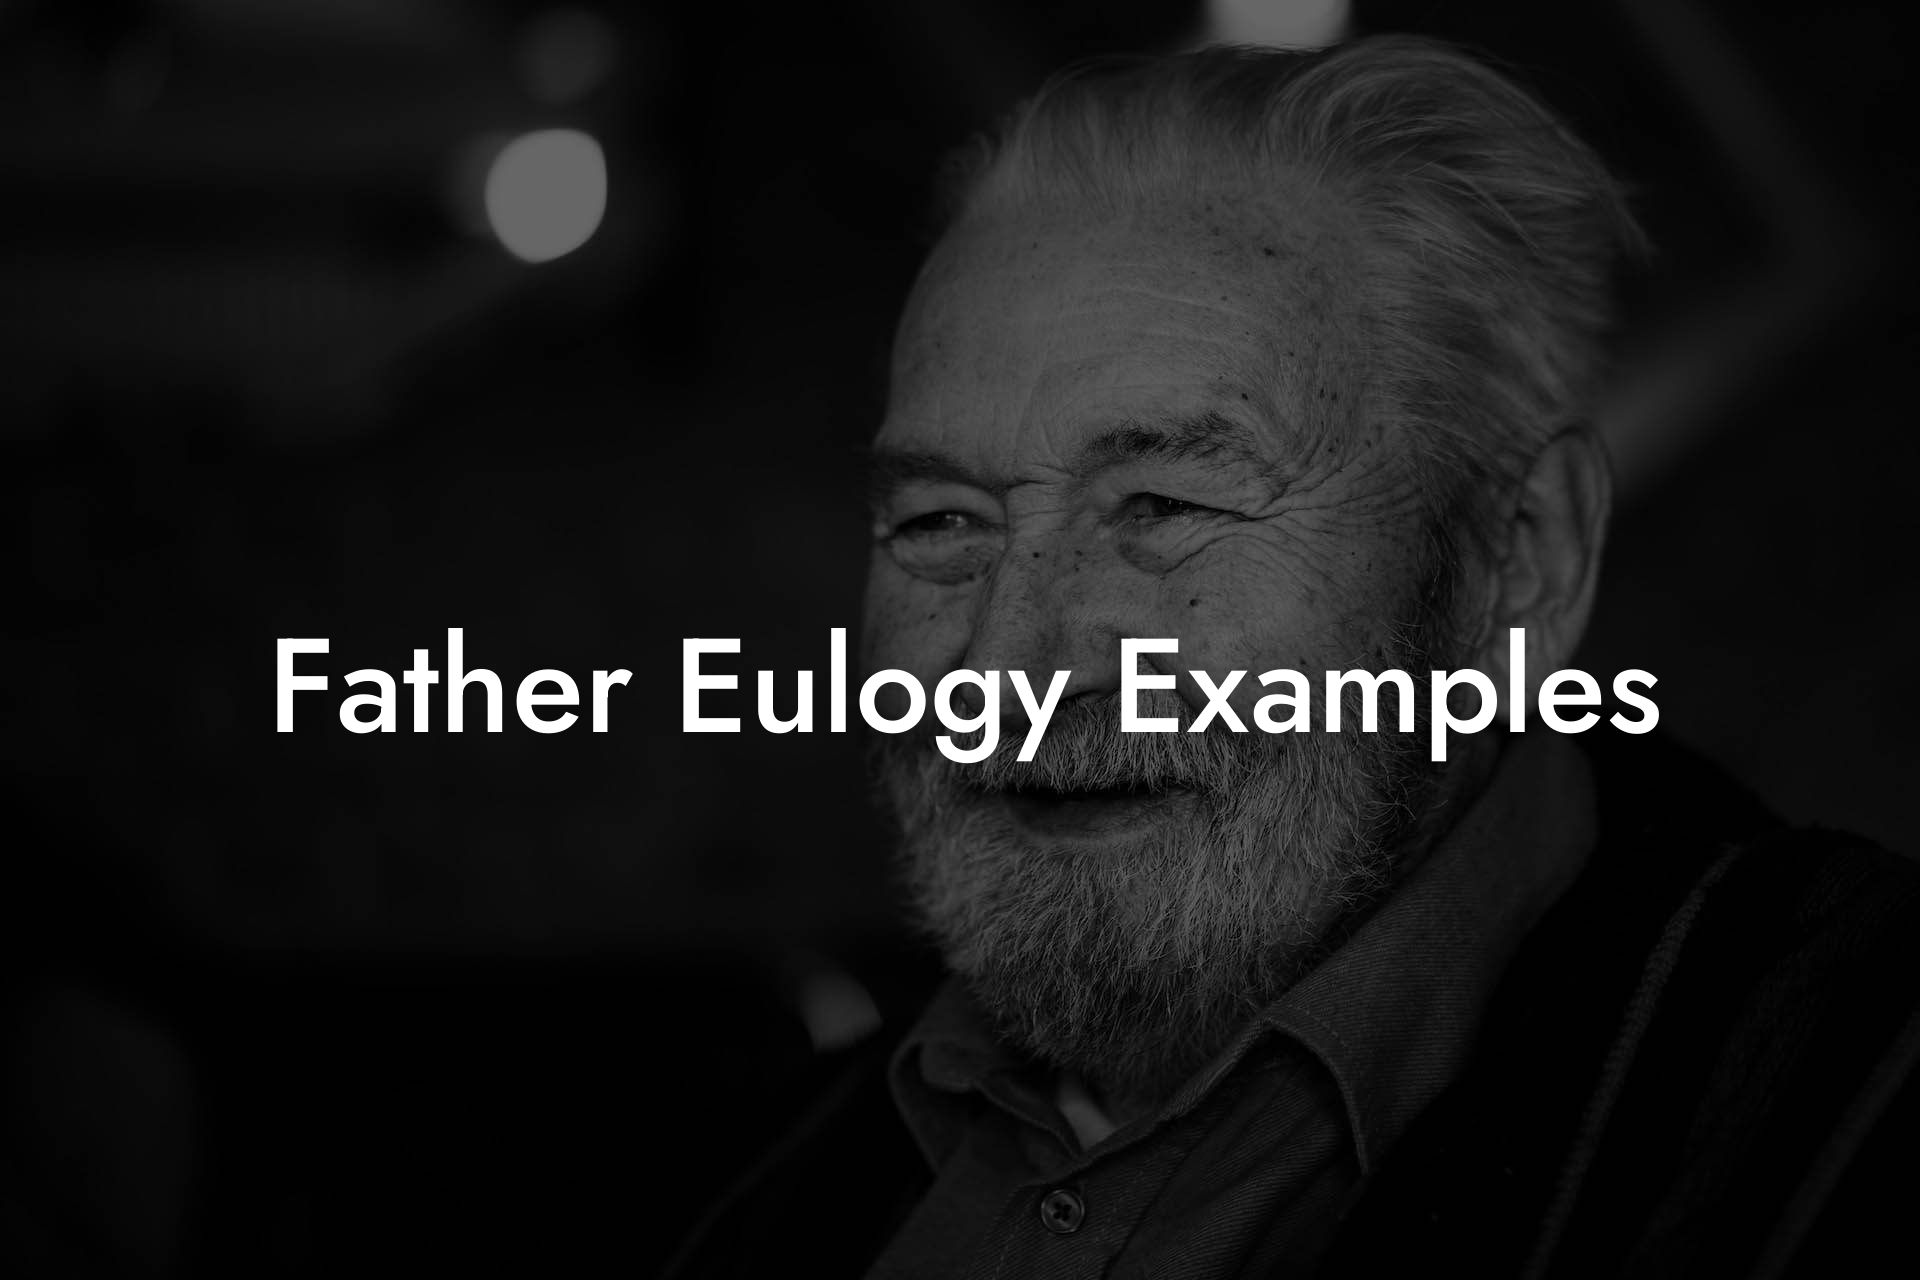 Father Eulogy Examples